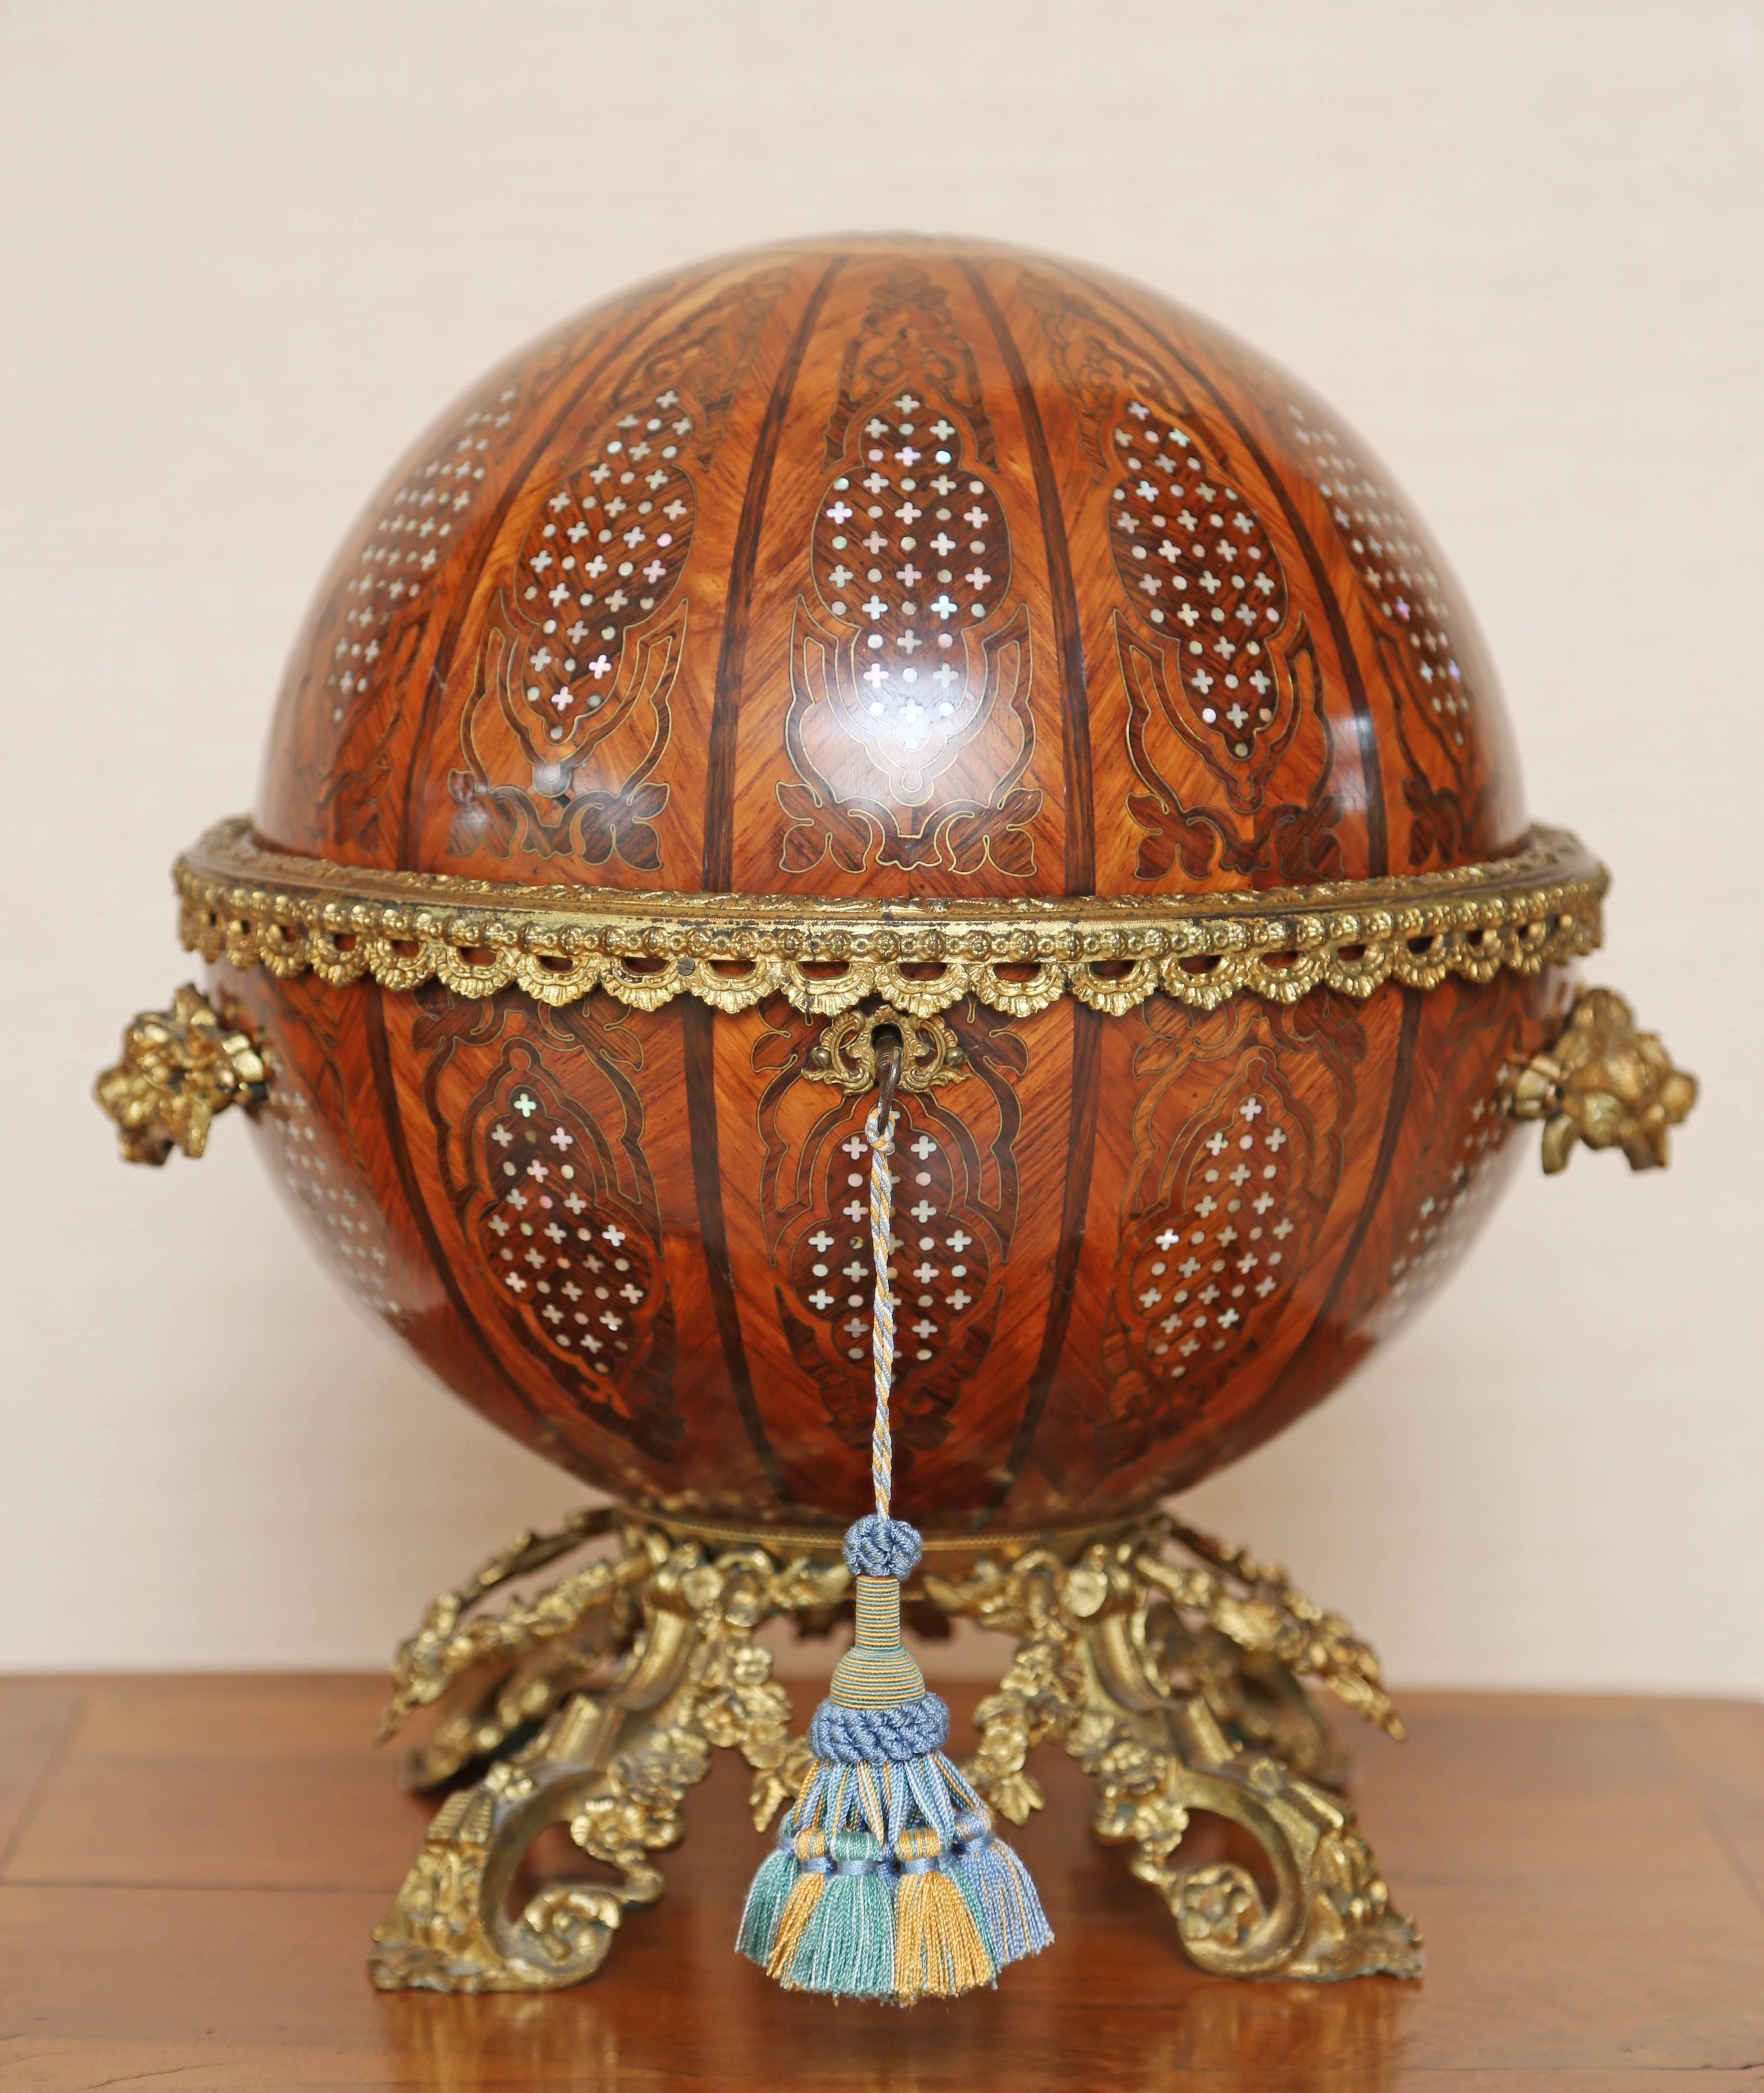 The globular form tantalus with elaborate marquetry decoration incorporating inlaid mother-of-pearl dots and quatrefoils and mounted with gilt-bronze rose garlands as side handles and resting on a base conforming rose-garland festooned base; opening